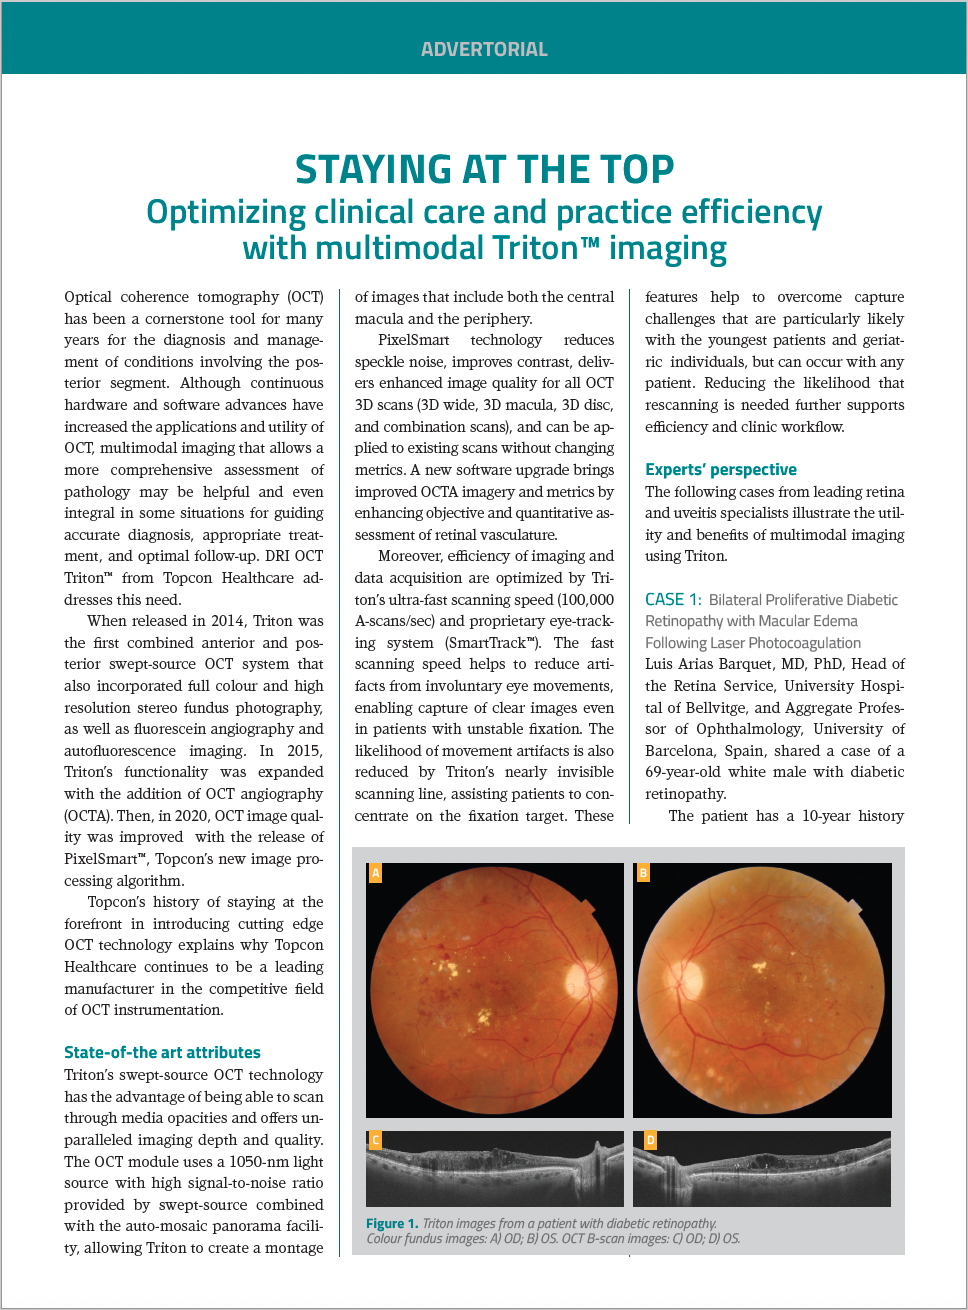 Staying at the top: Optimizing clinical care and practice efficiency with multimodal Triton imaging